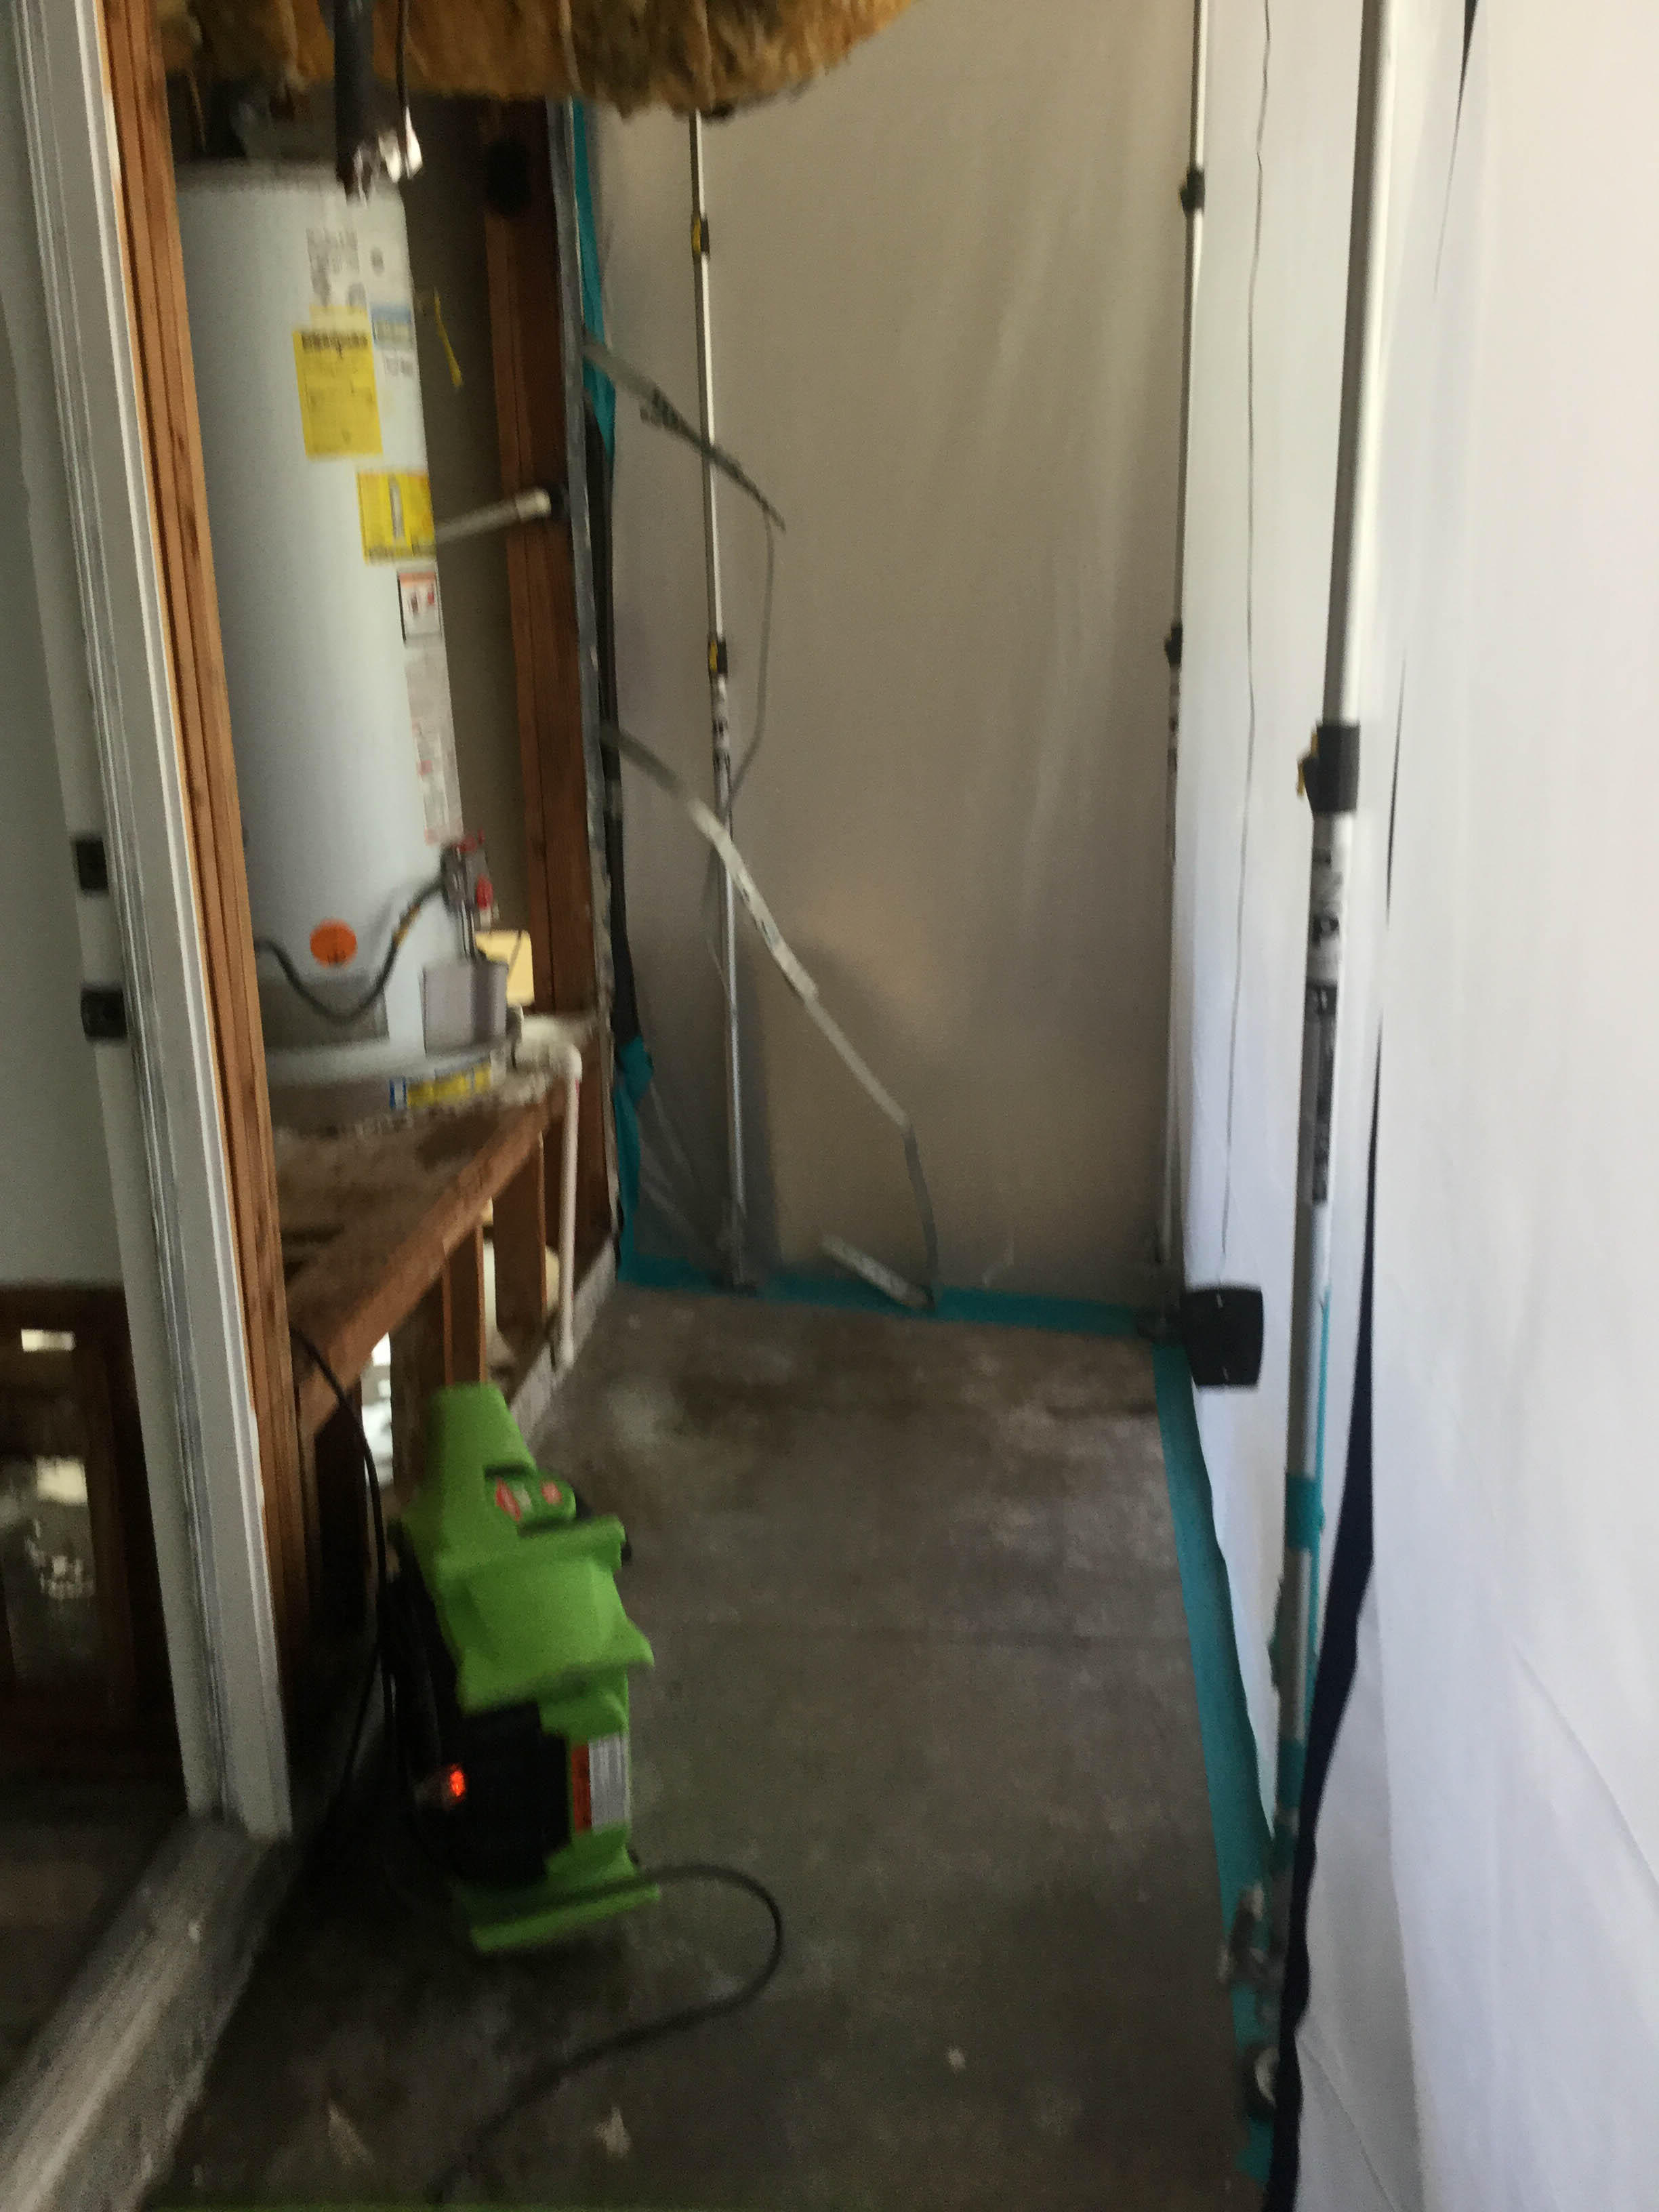 When your Laguna Beach property has been flooded, it might be difficult to know where to begin or how to clean it up. SERVPRO of Laguna Beach/Dana Point is ready to respond to any cleaning or restoration needs.